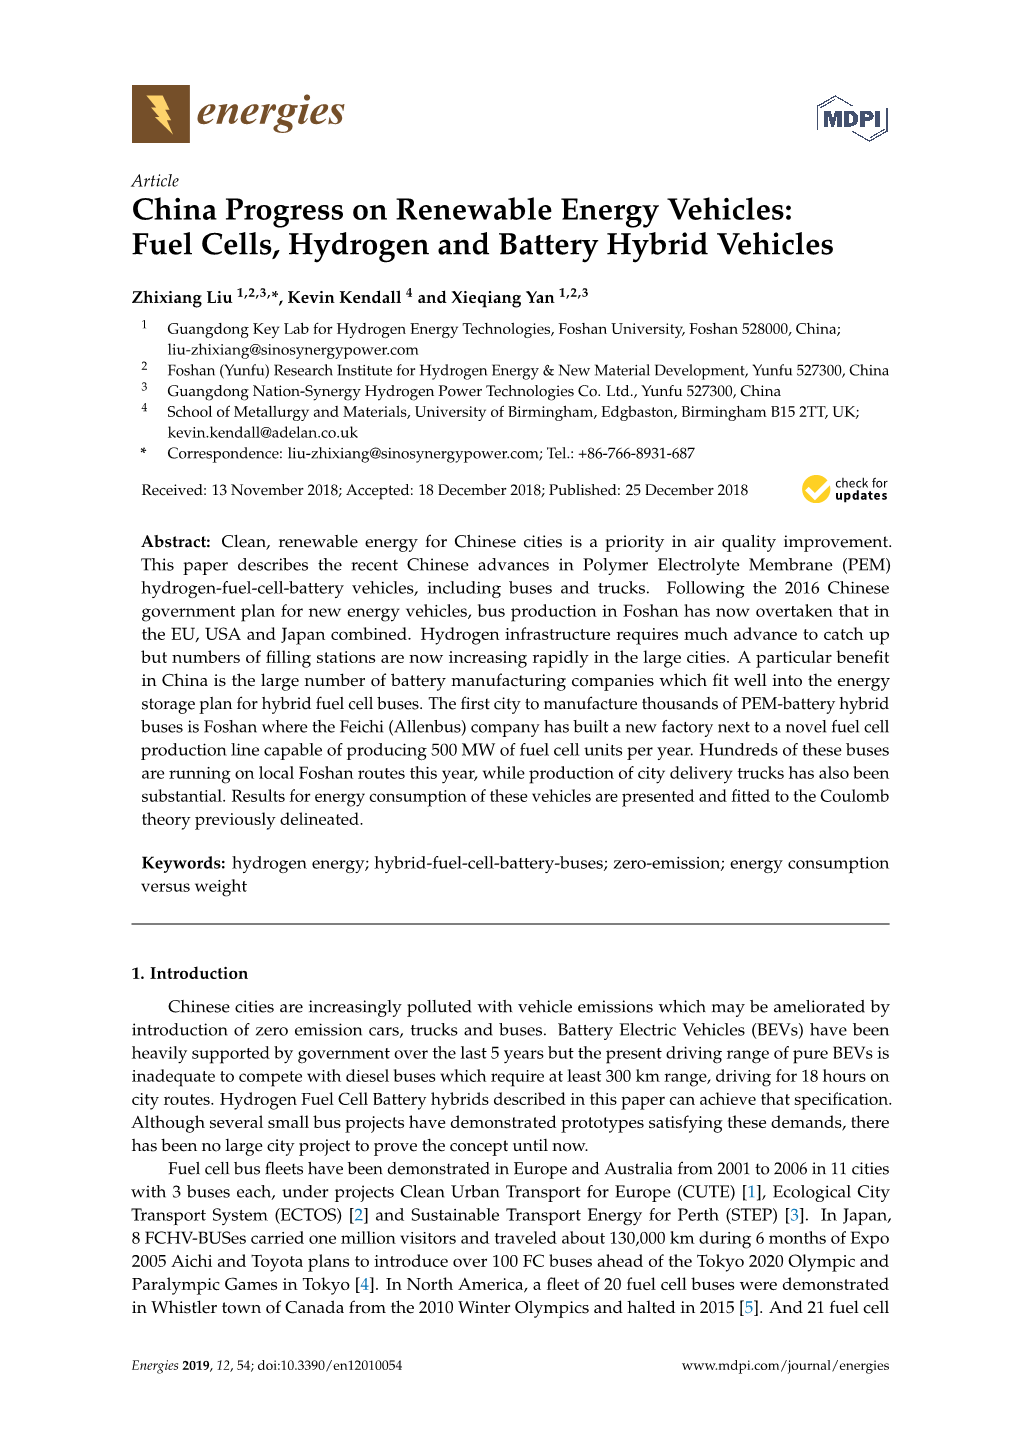 Fuel Cells, Hydrogen and Battery Hybrid Vehicles